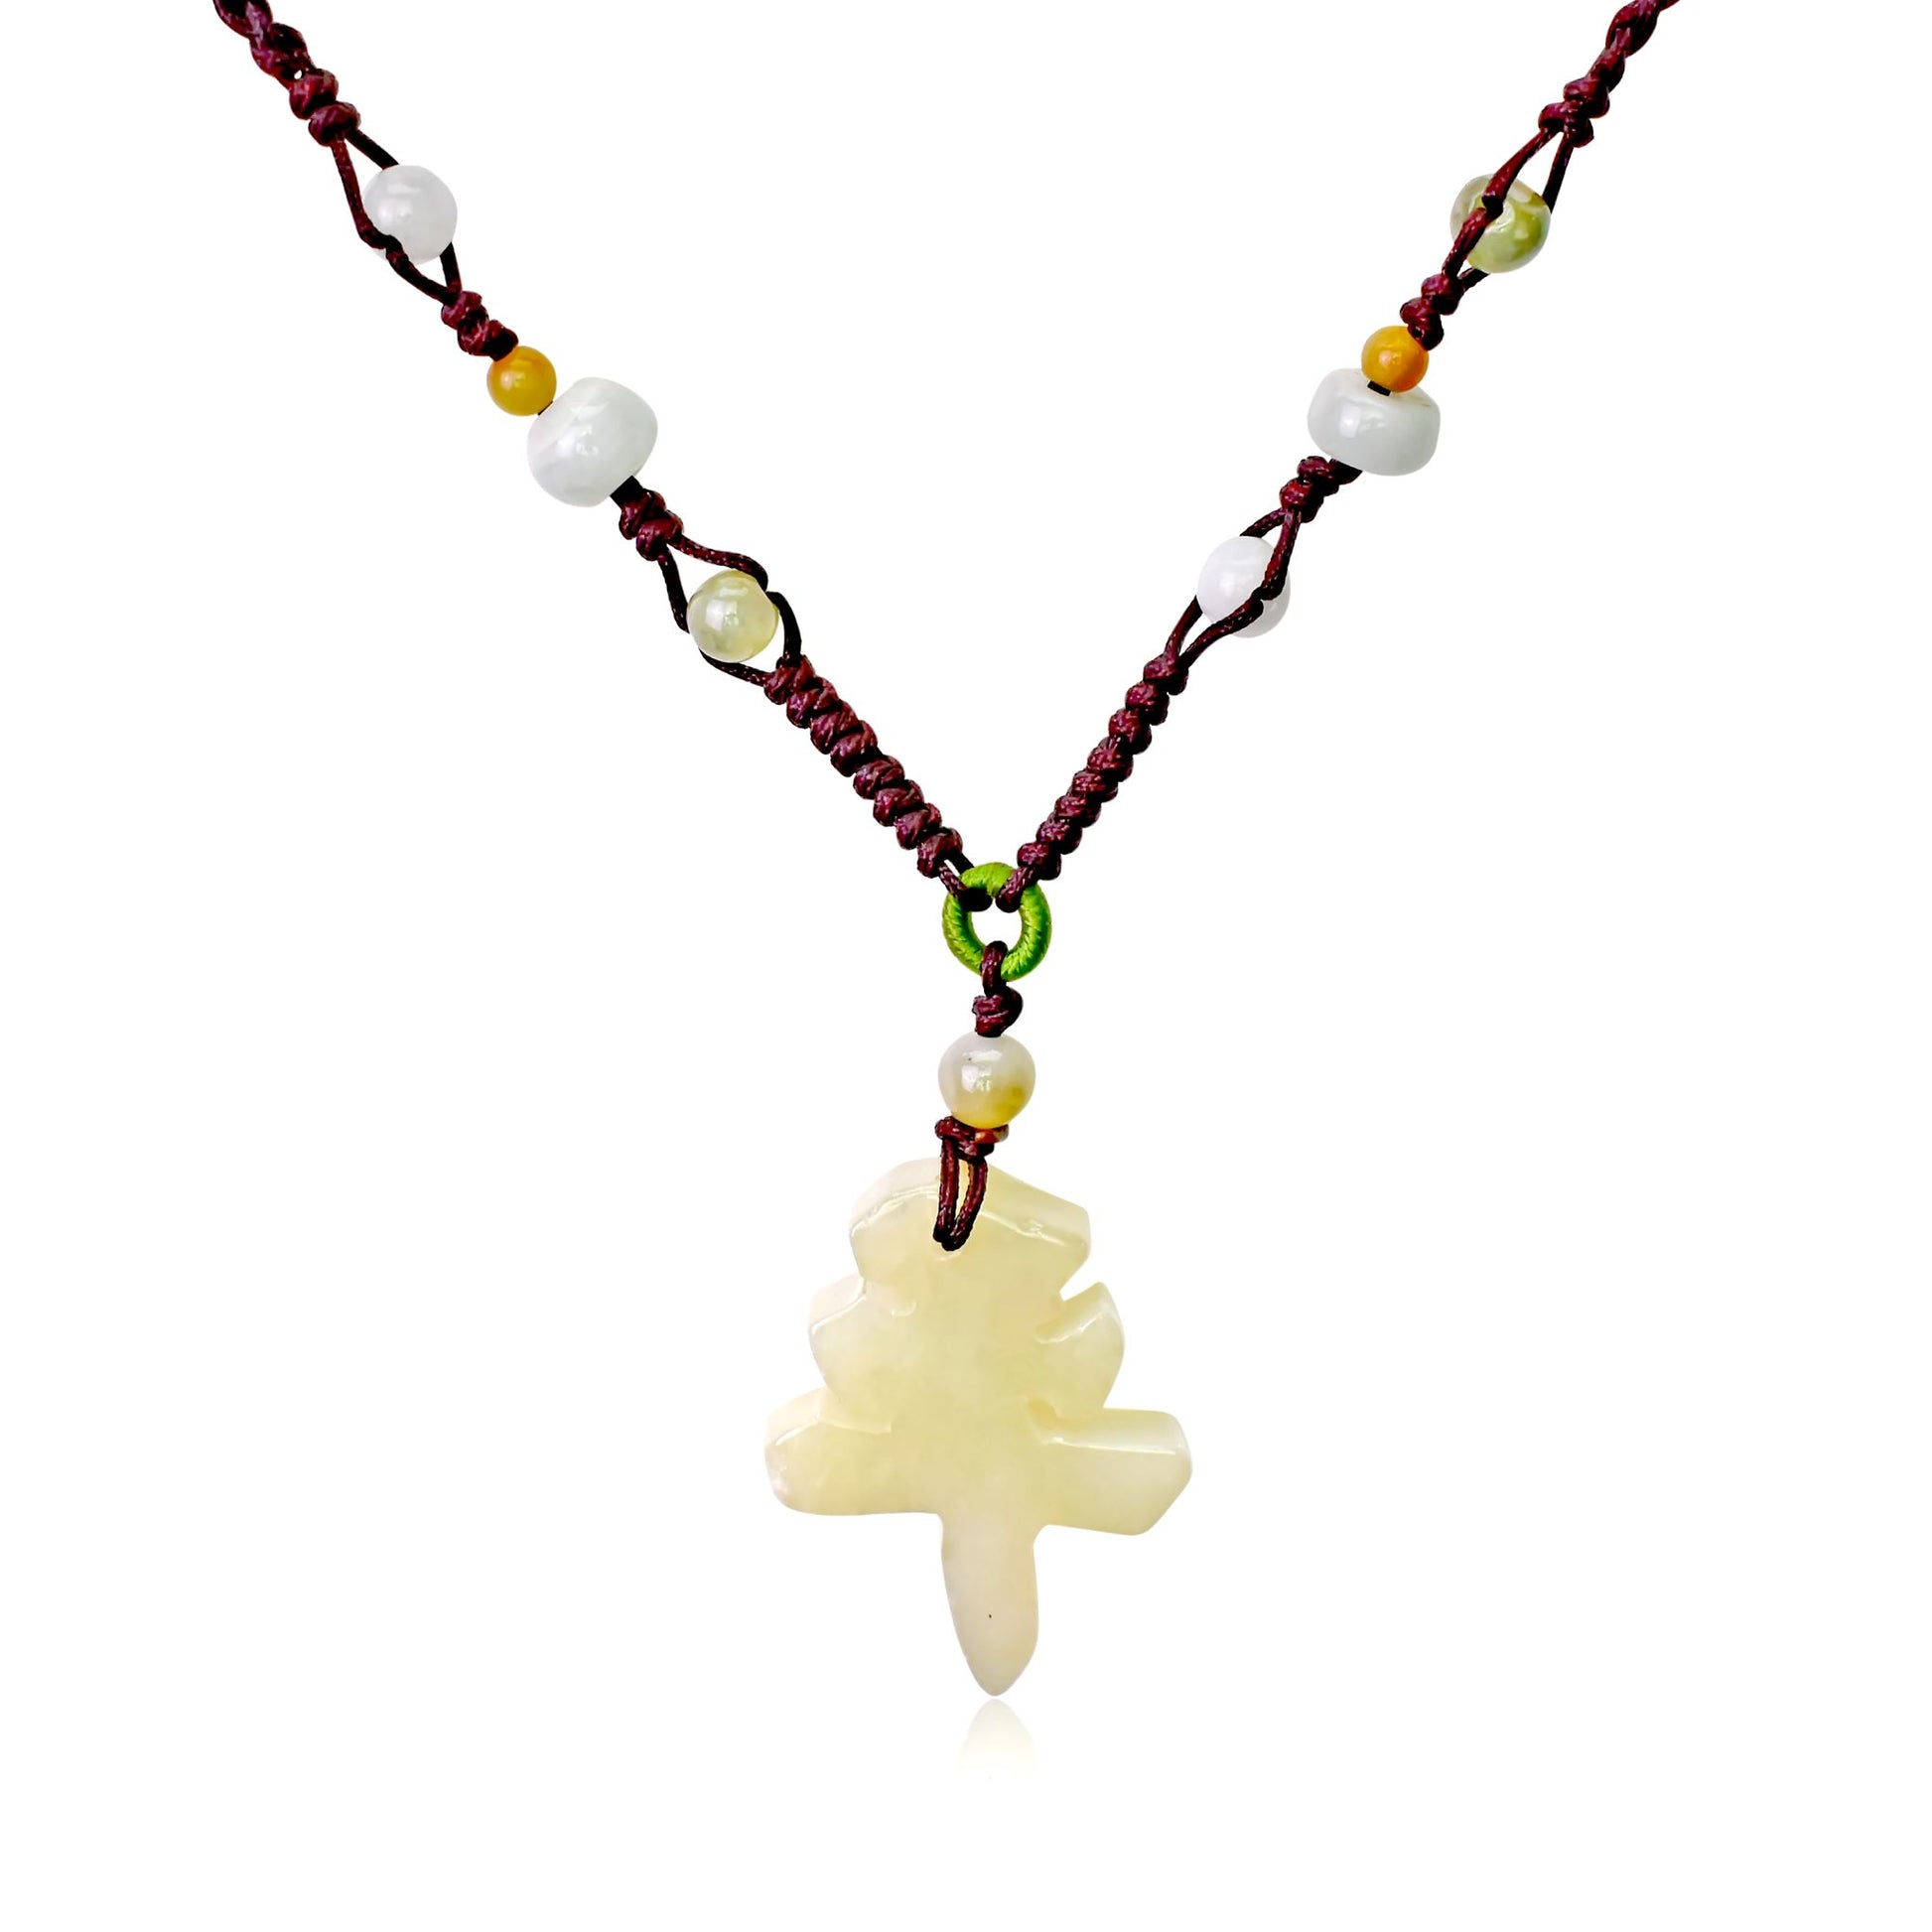 Find Peace and Happiness with Chinese Peace Character Necklace